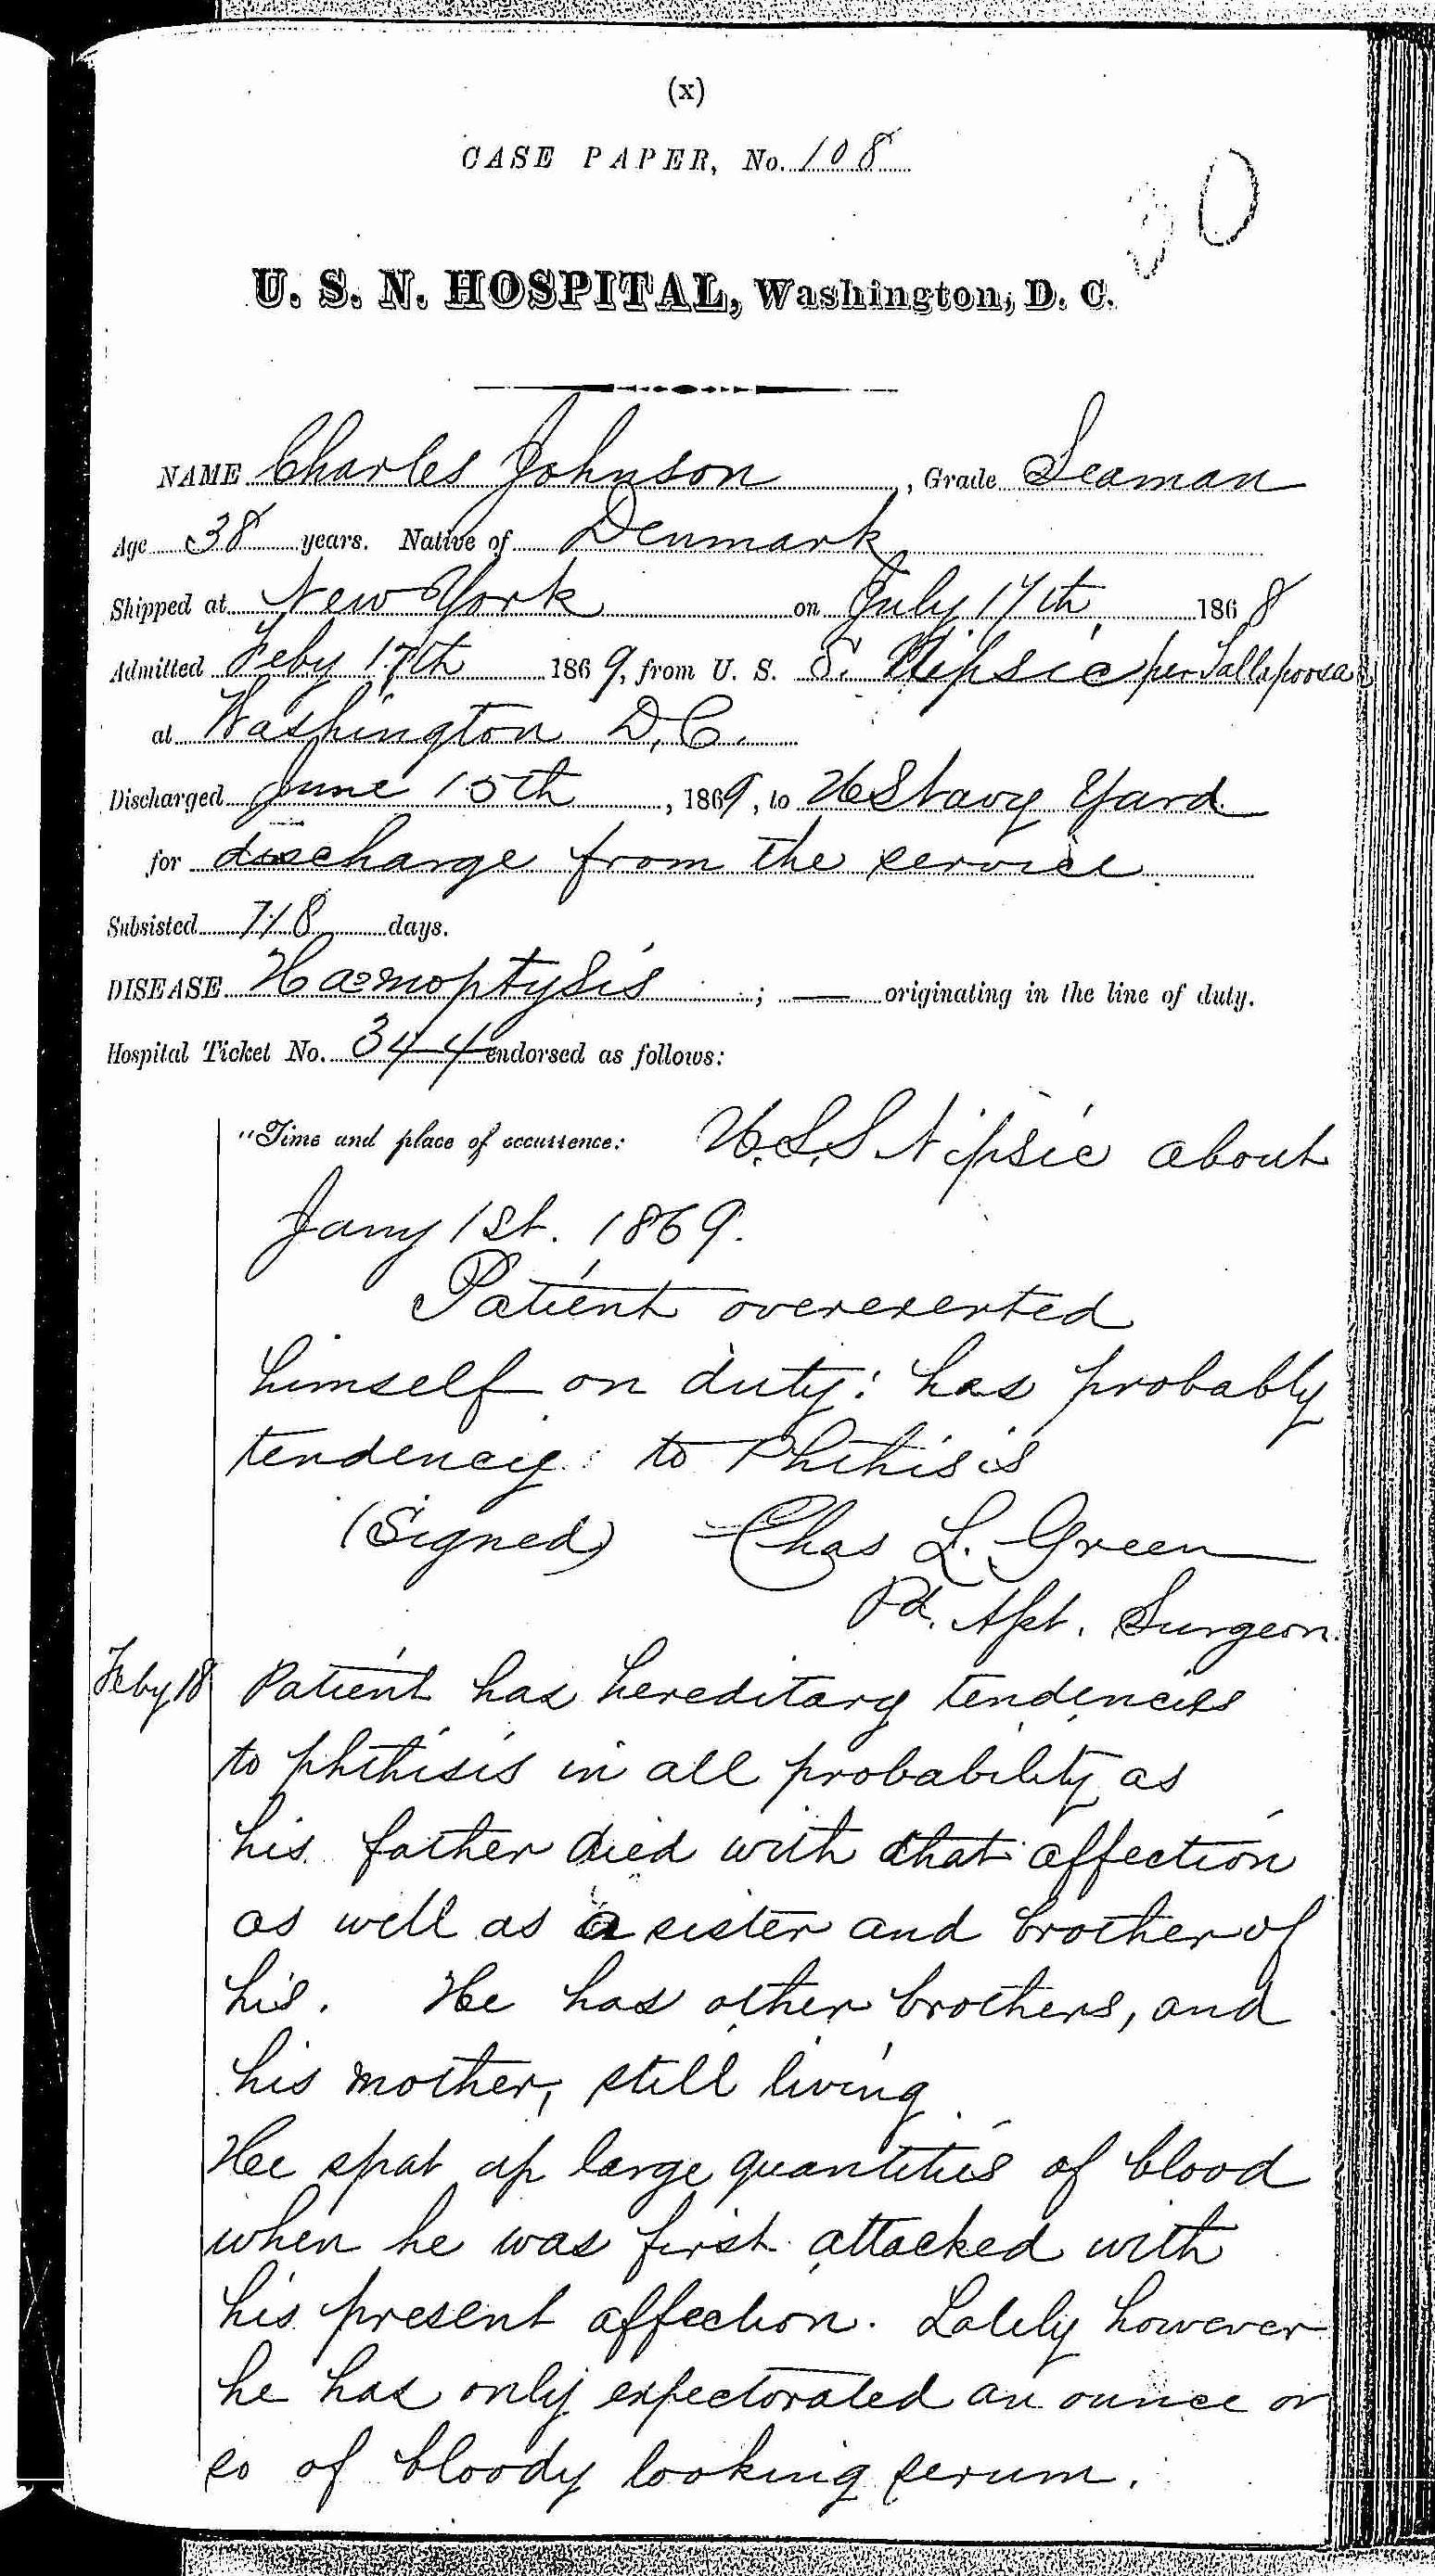 Entry for Charles Johnson (page 1 of 15) in the log Hospital Tickets and Case Papers - Naval Hospital - Washington, D.C. - 1868-69